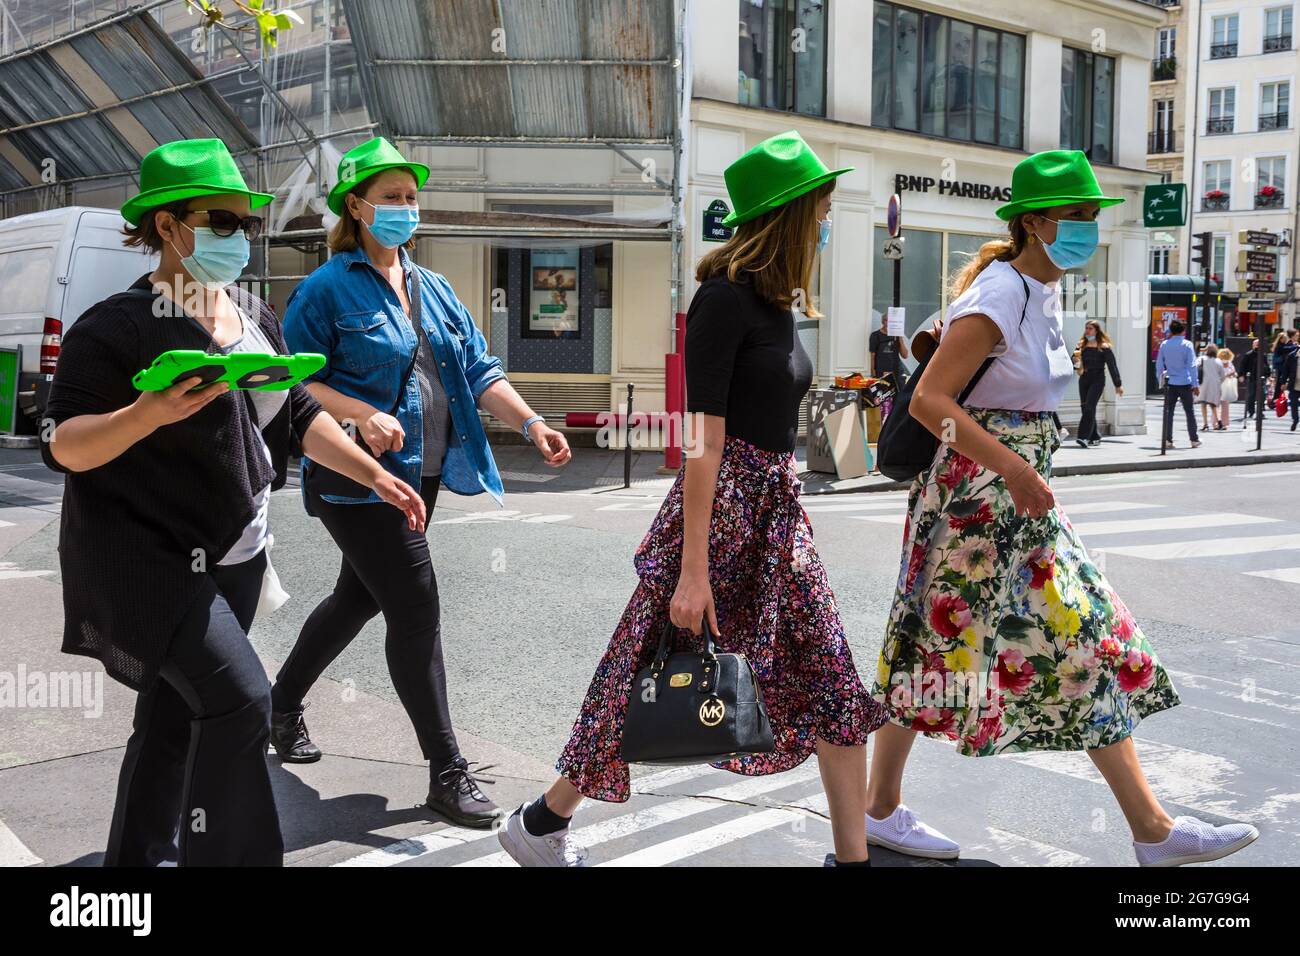 Group of women wearing green hats on guided walking tour of city - Paris, France. Stock Photo